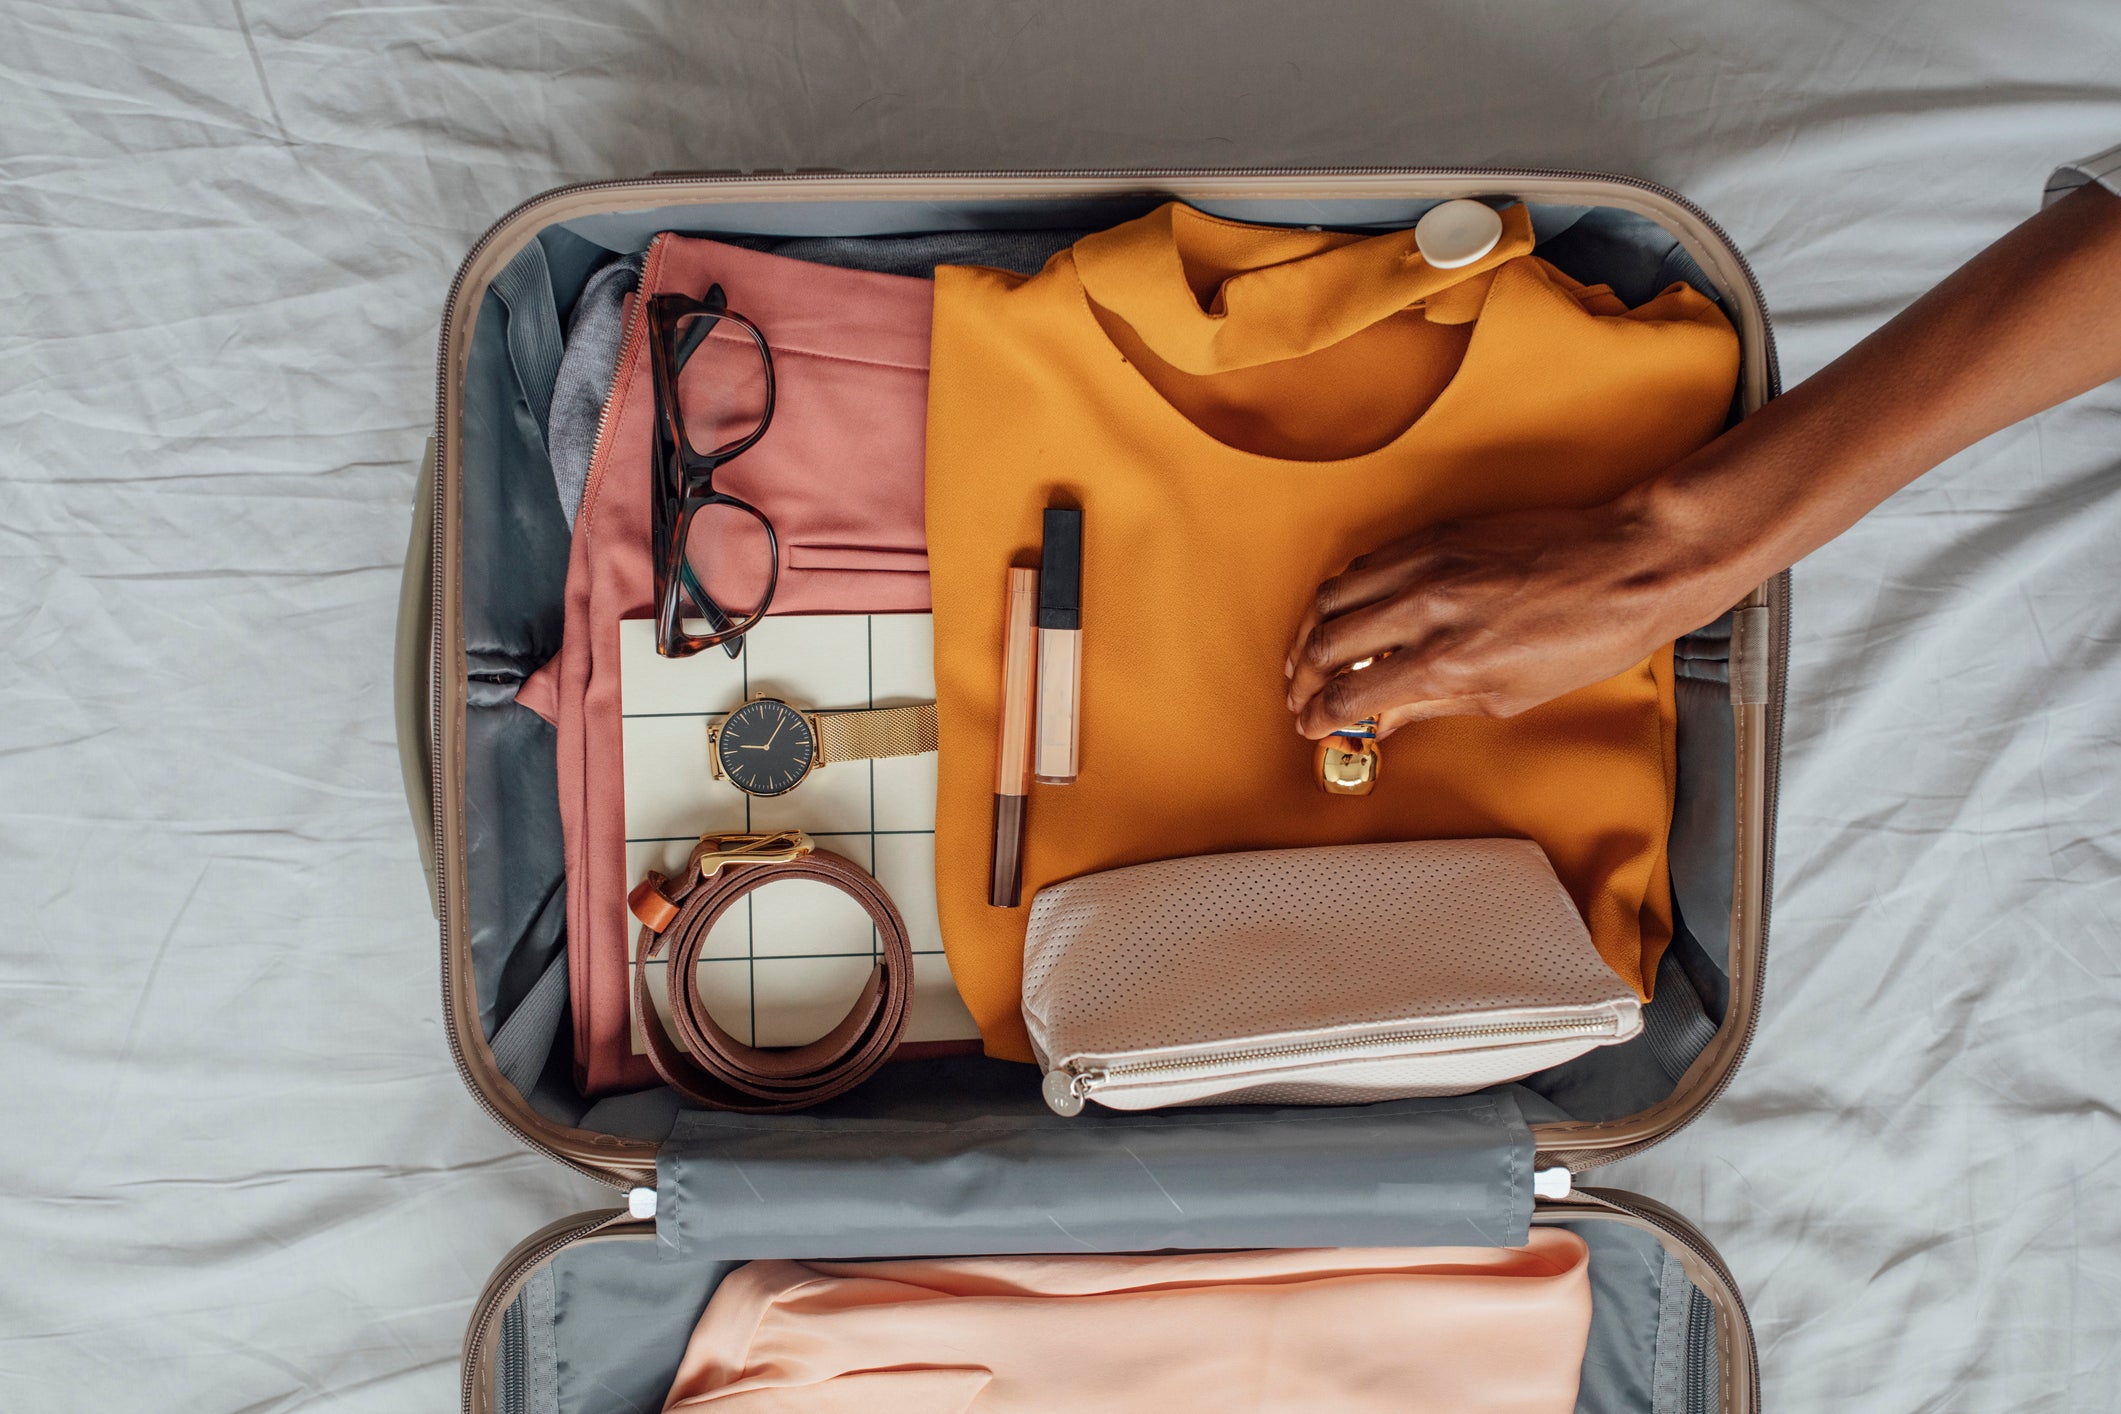 What's In Your Travel Bag?